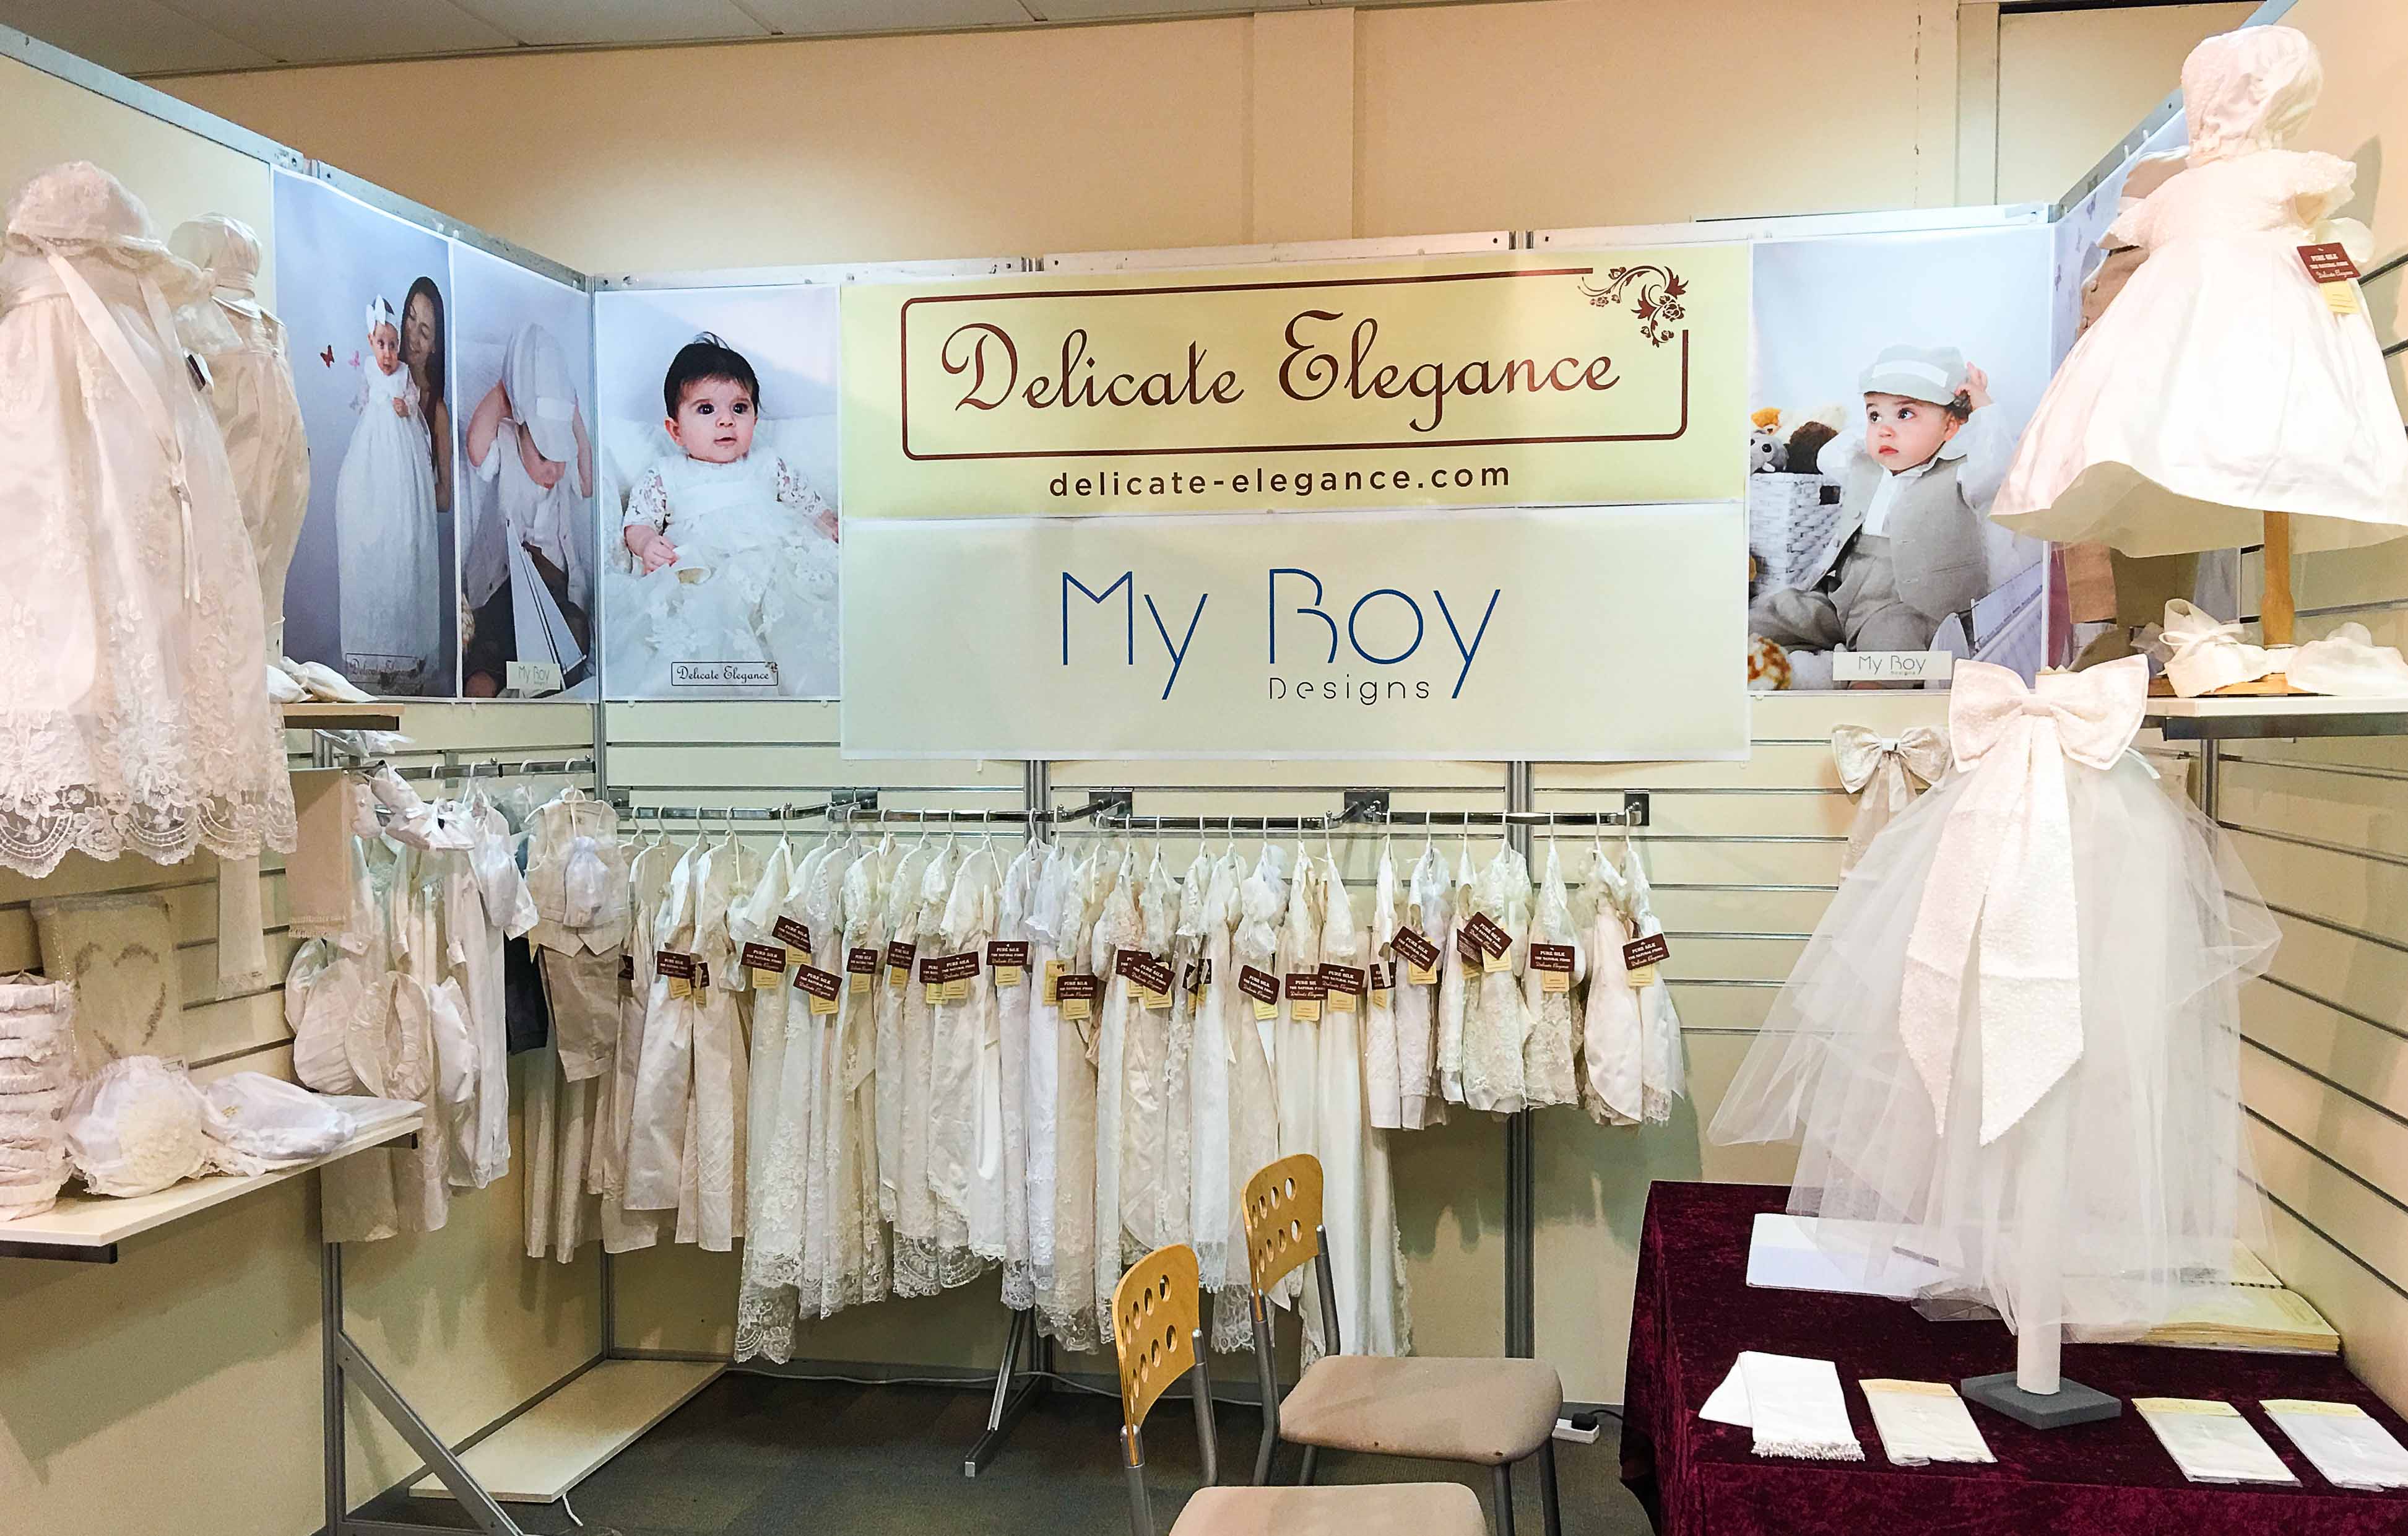 Delicate Elegance exhibiting at INDx Kidswear trade show in Solihull, UK in July 2016